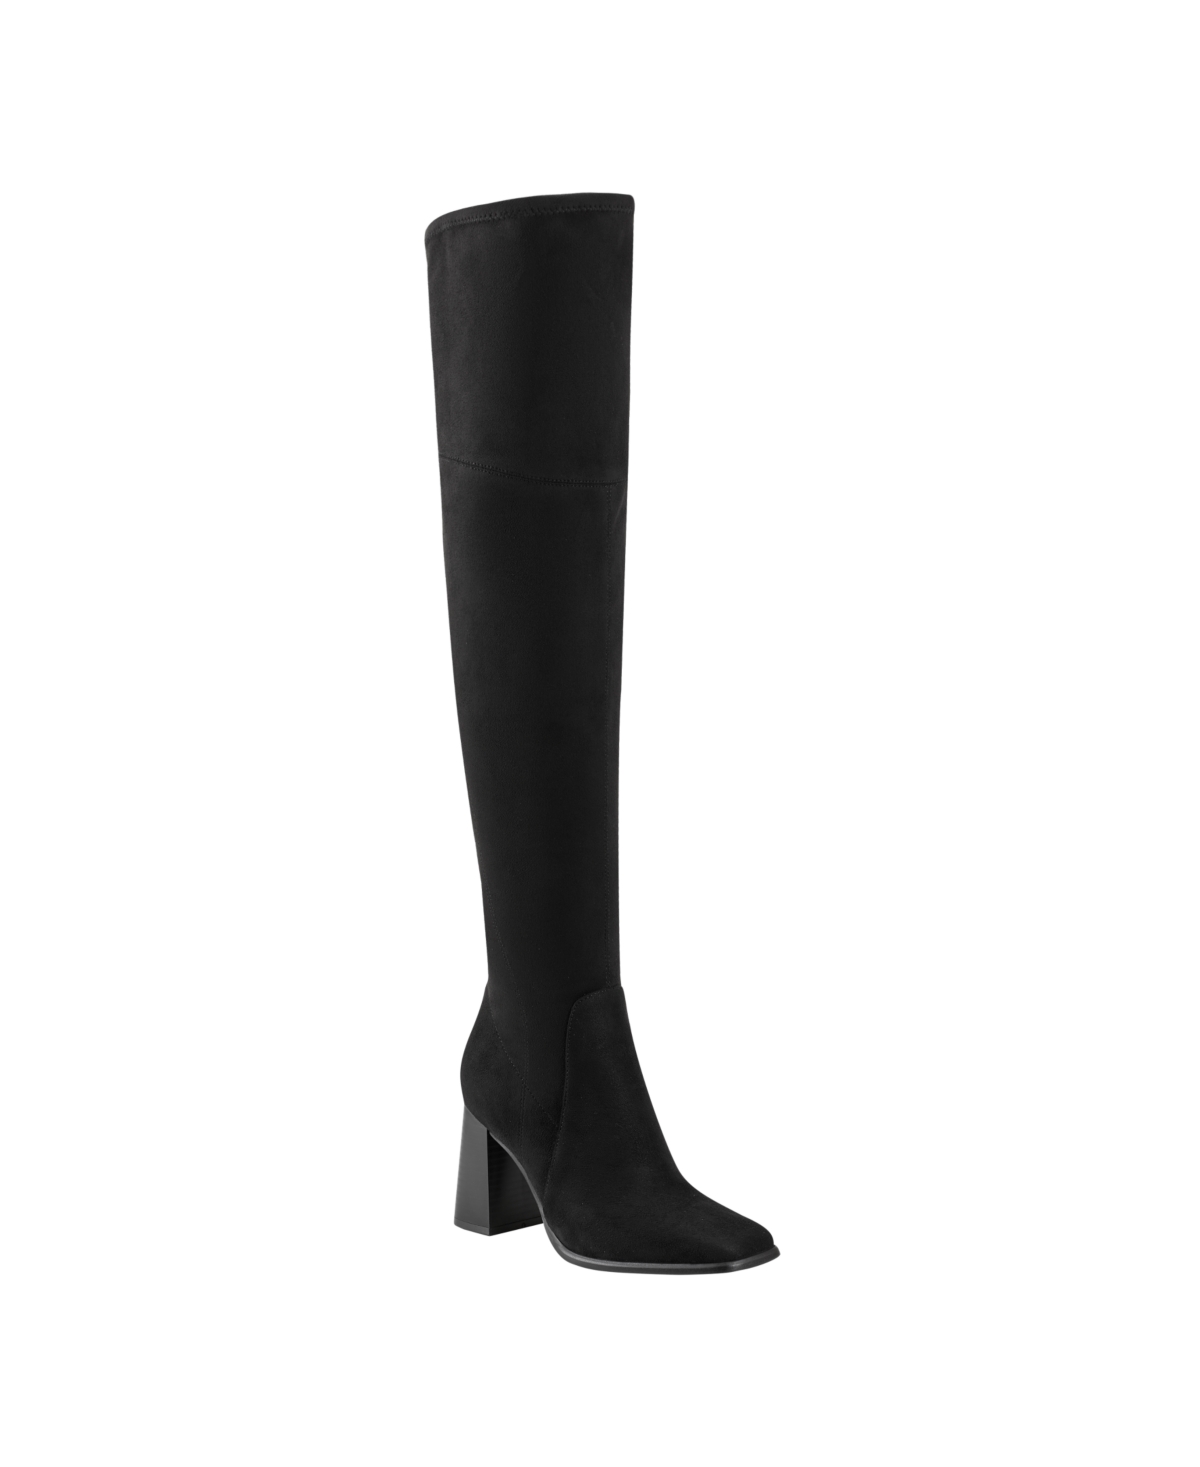 Women's Denki Over The Knee Square Toe Boots - Black Smooth